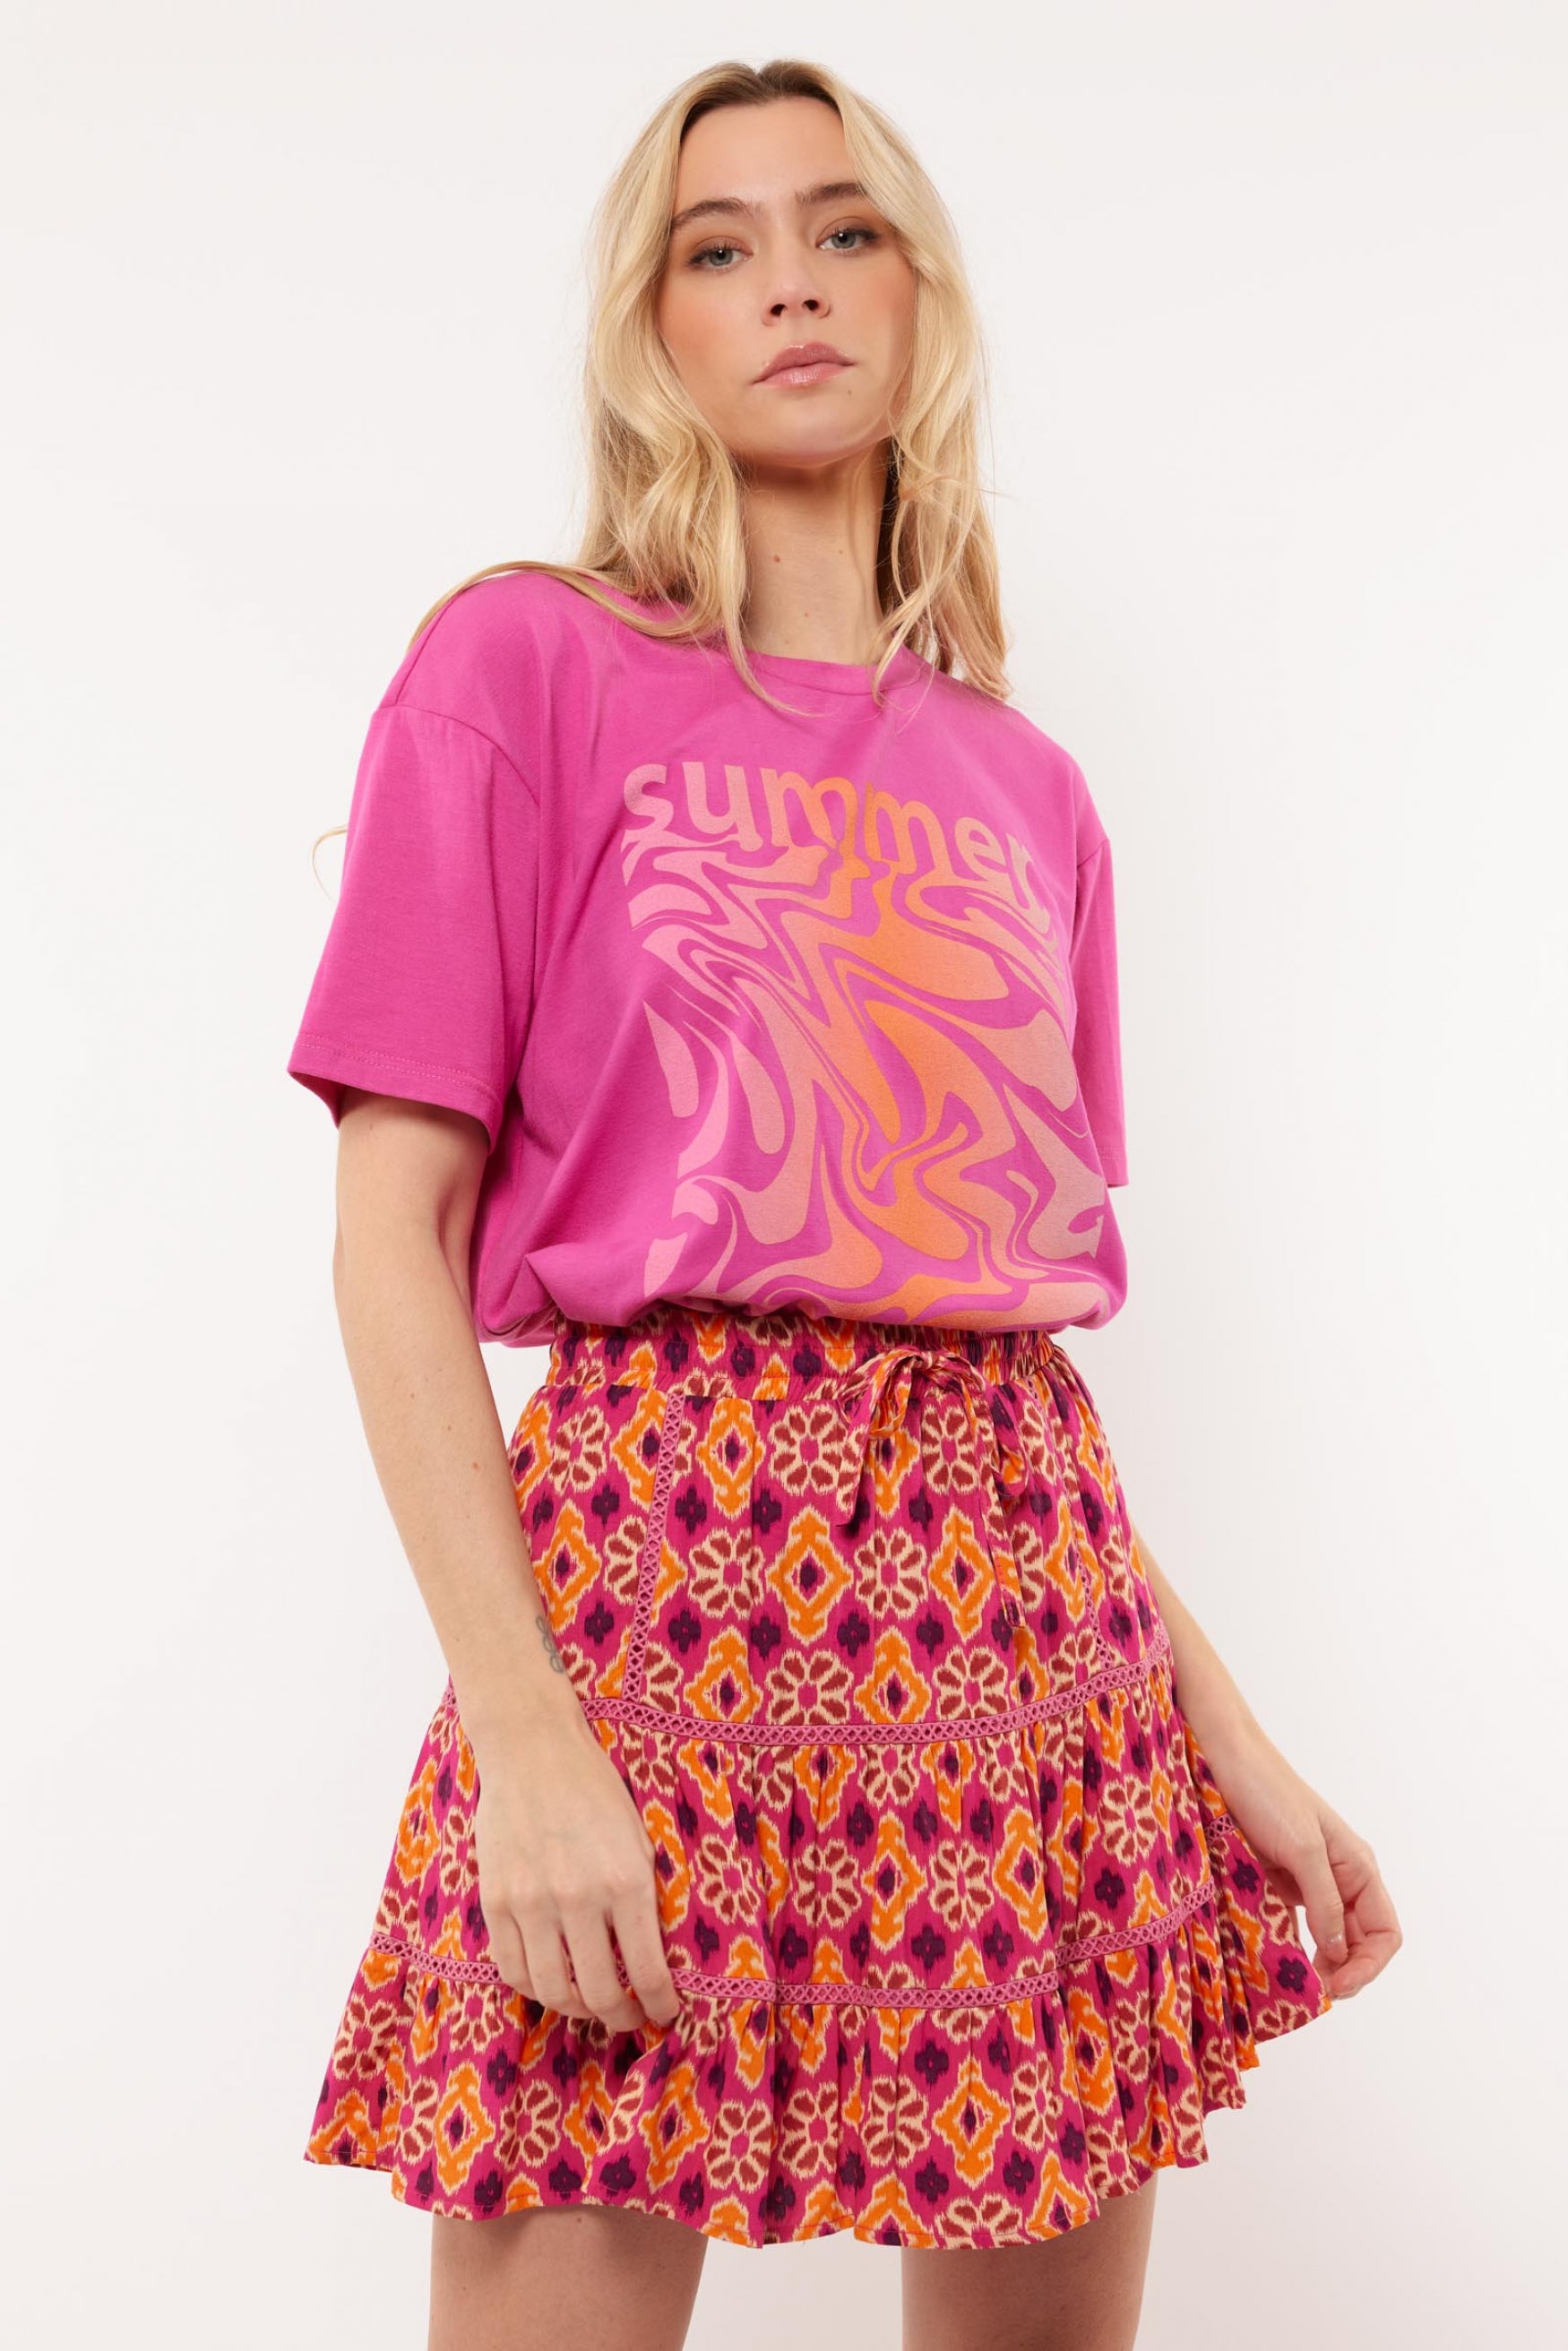 Isaleigh T-shirt | Bright Pink